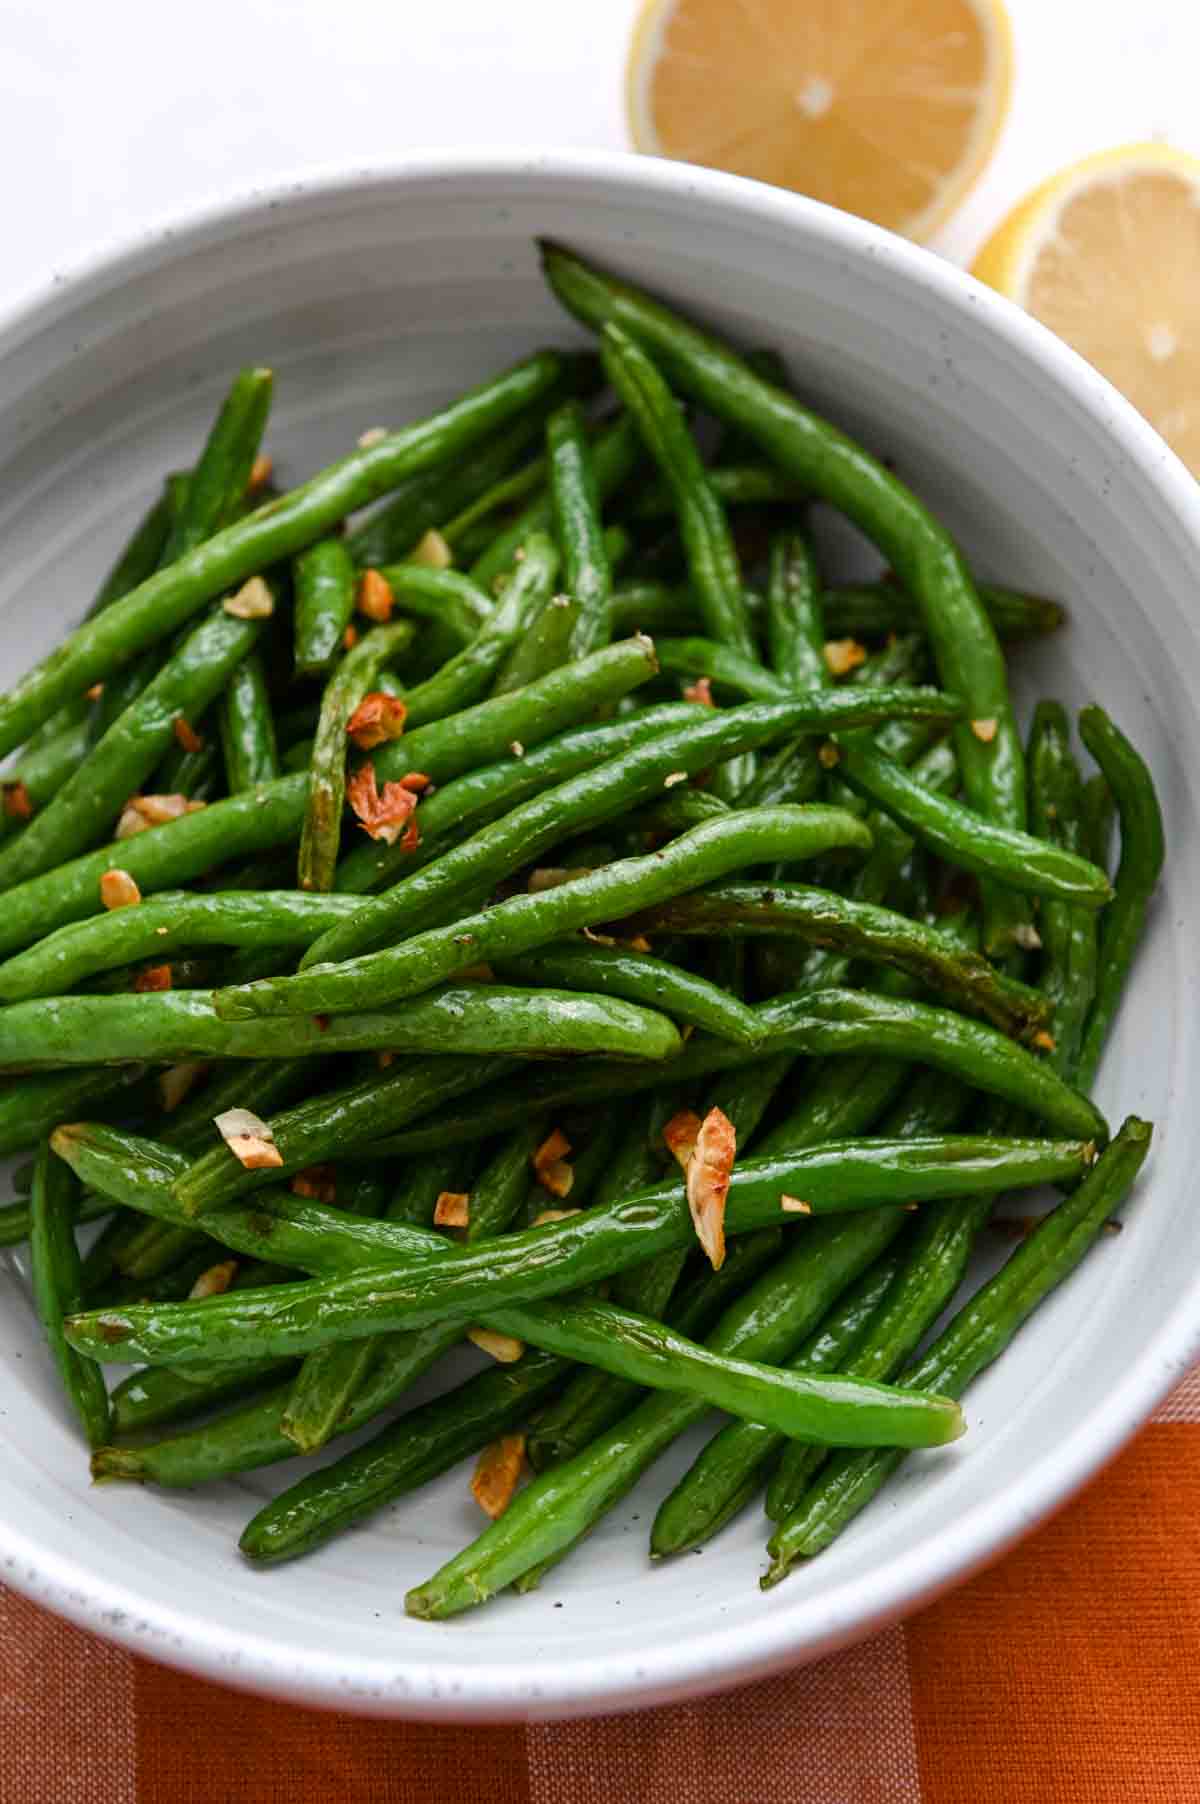 Roasted green beans in a bowl with golden garlic.